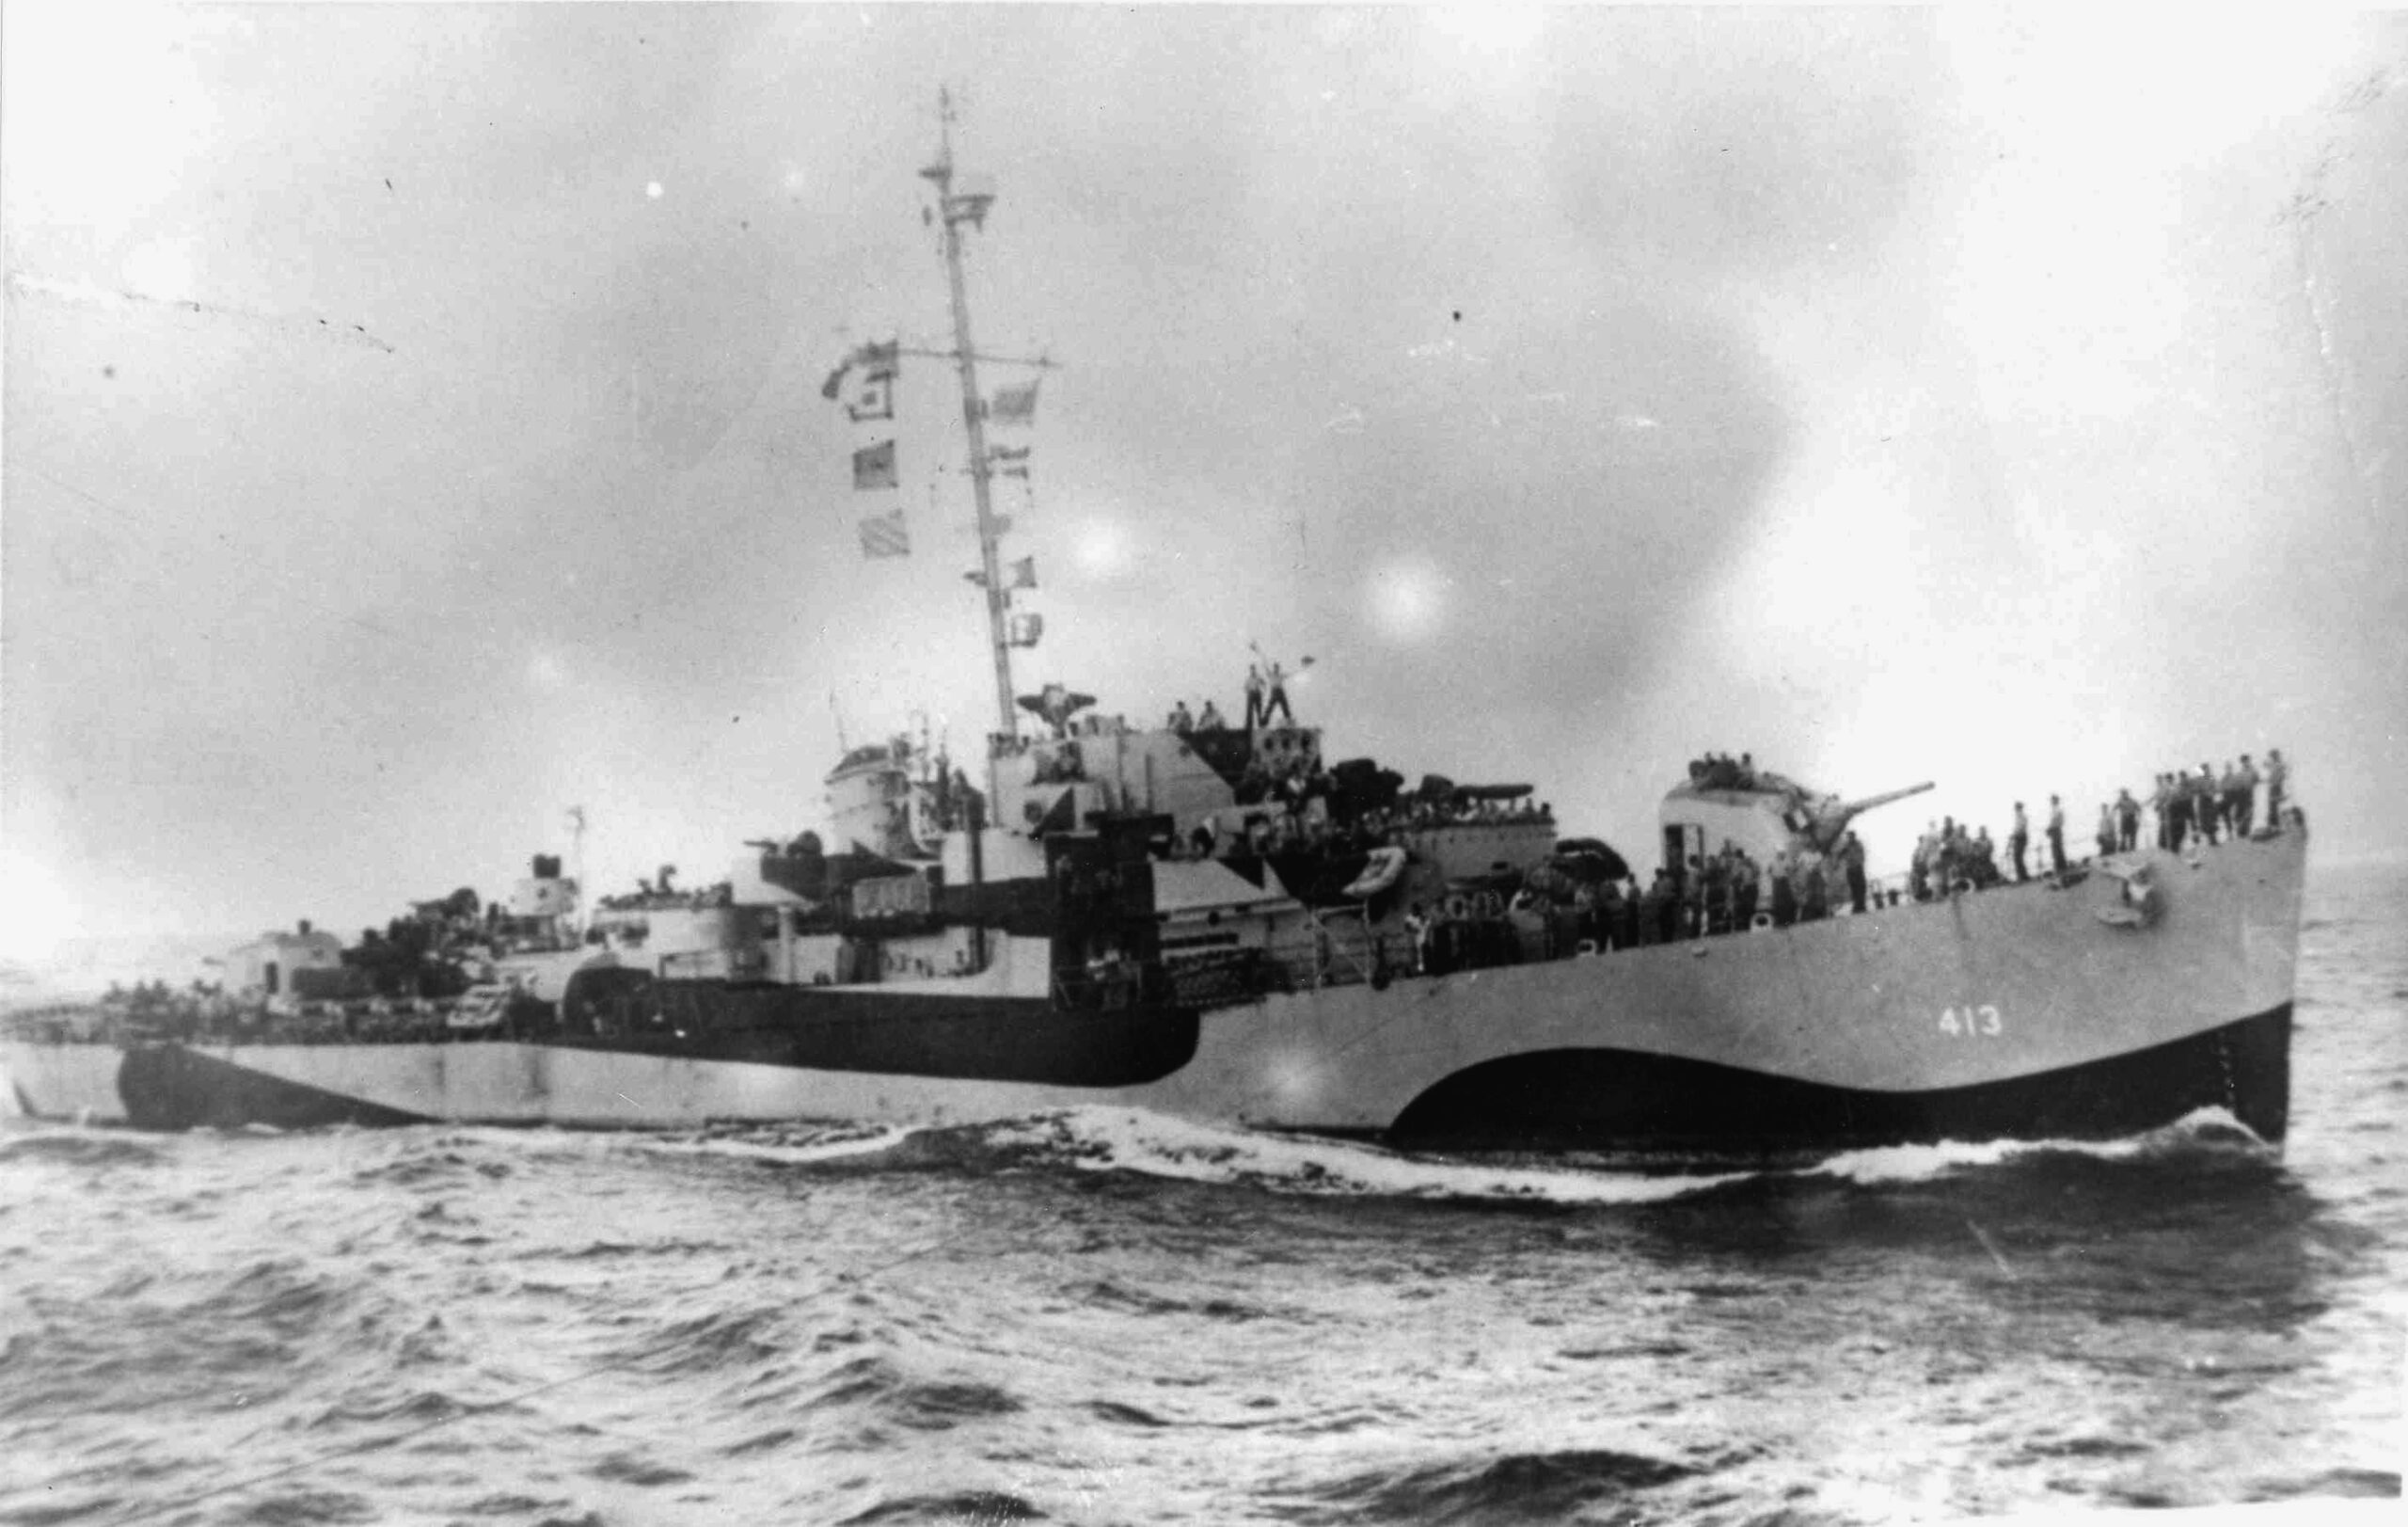 The destroyer escort USS Samuel B. Roberts took part in the epic struggle that came to be known as the Battle of Leyte Gulf. This photograph was taken in October 1944, a week before she was sunk in the Battle off Samar.